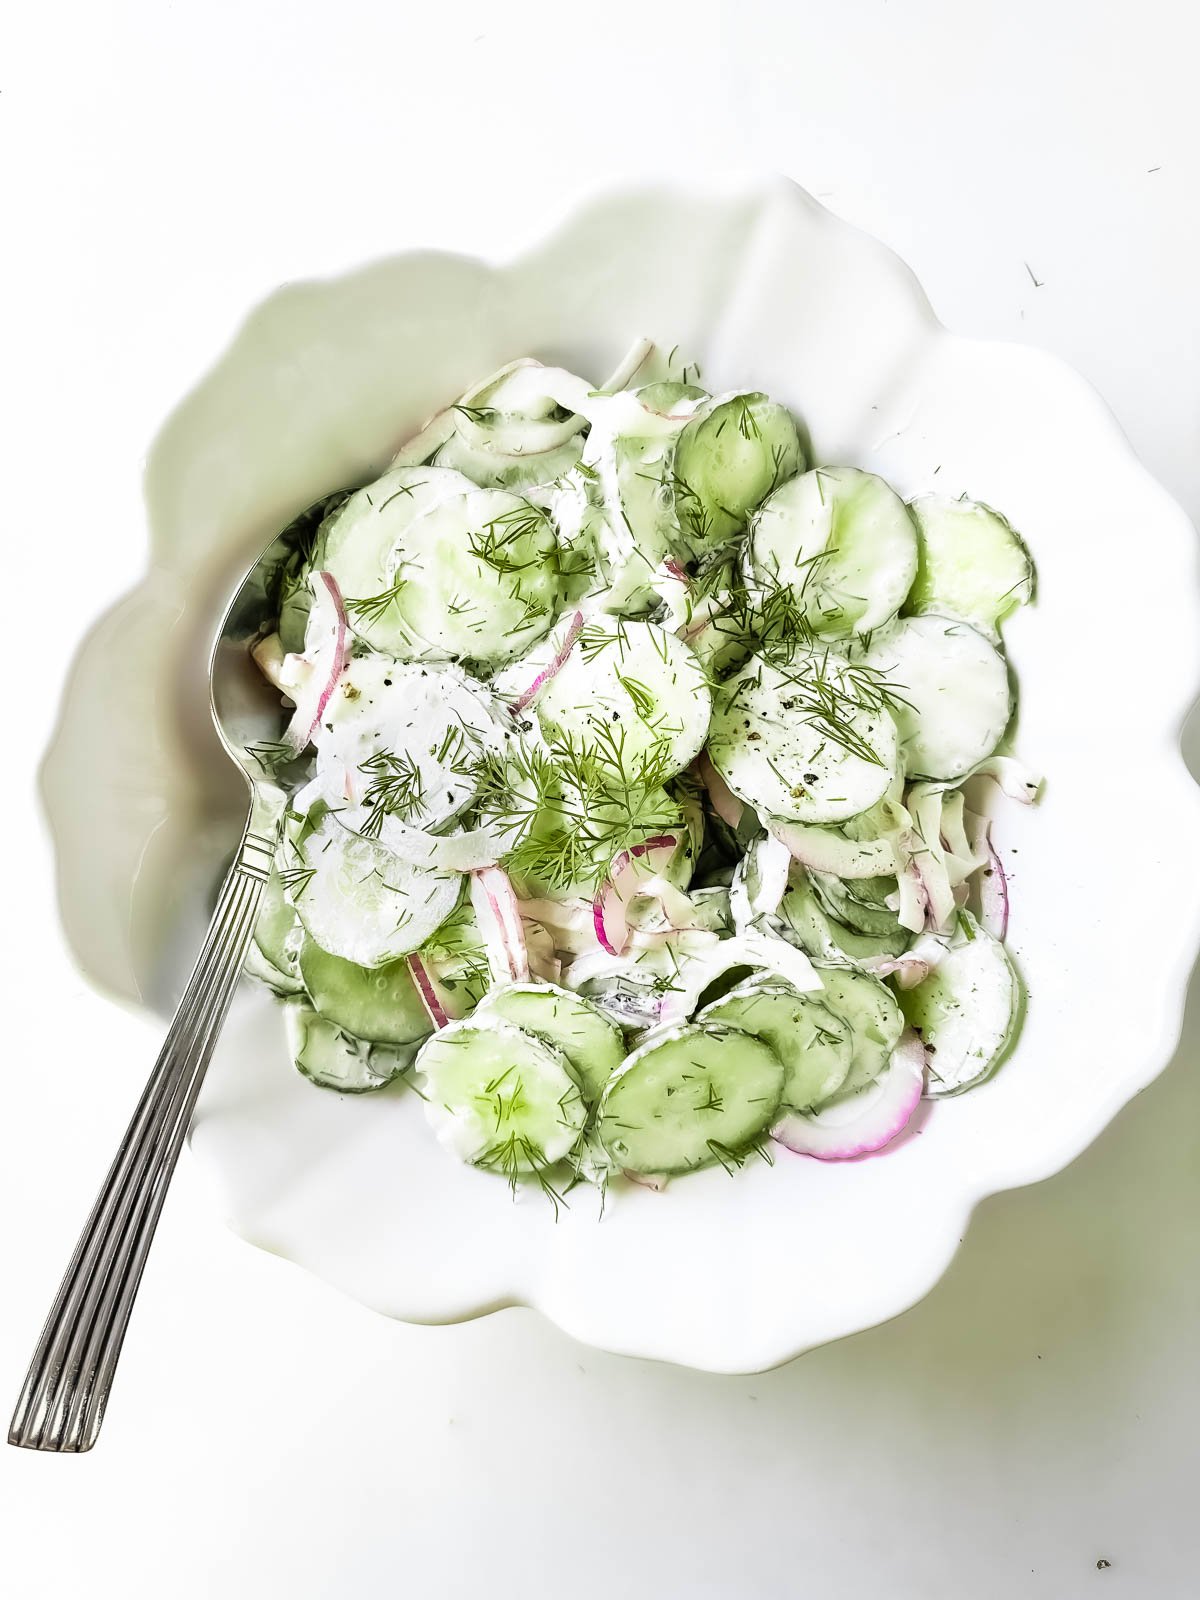 Creamy cucumber salad garnished with sour cream and dill.